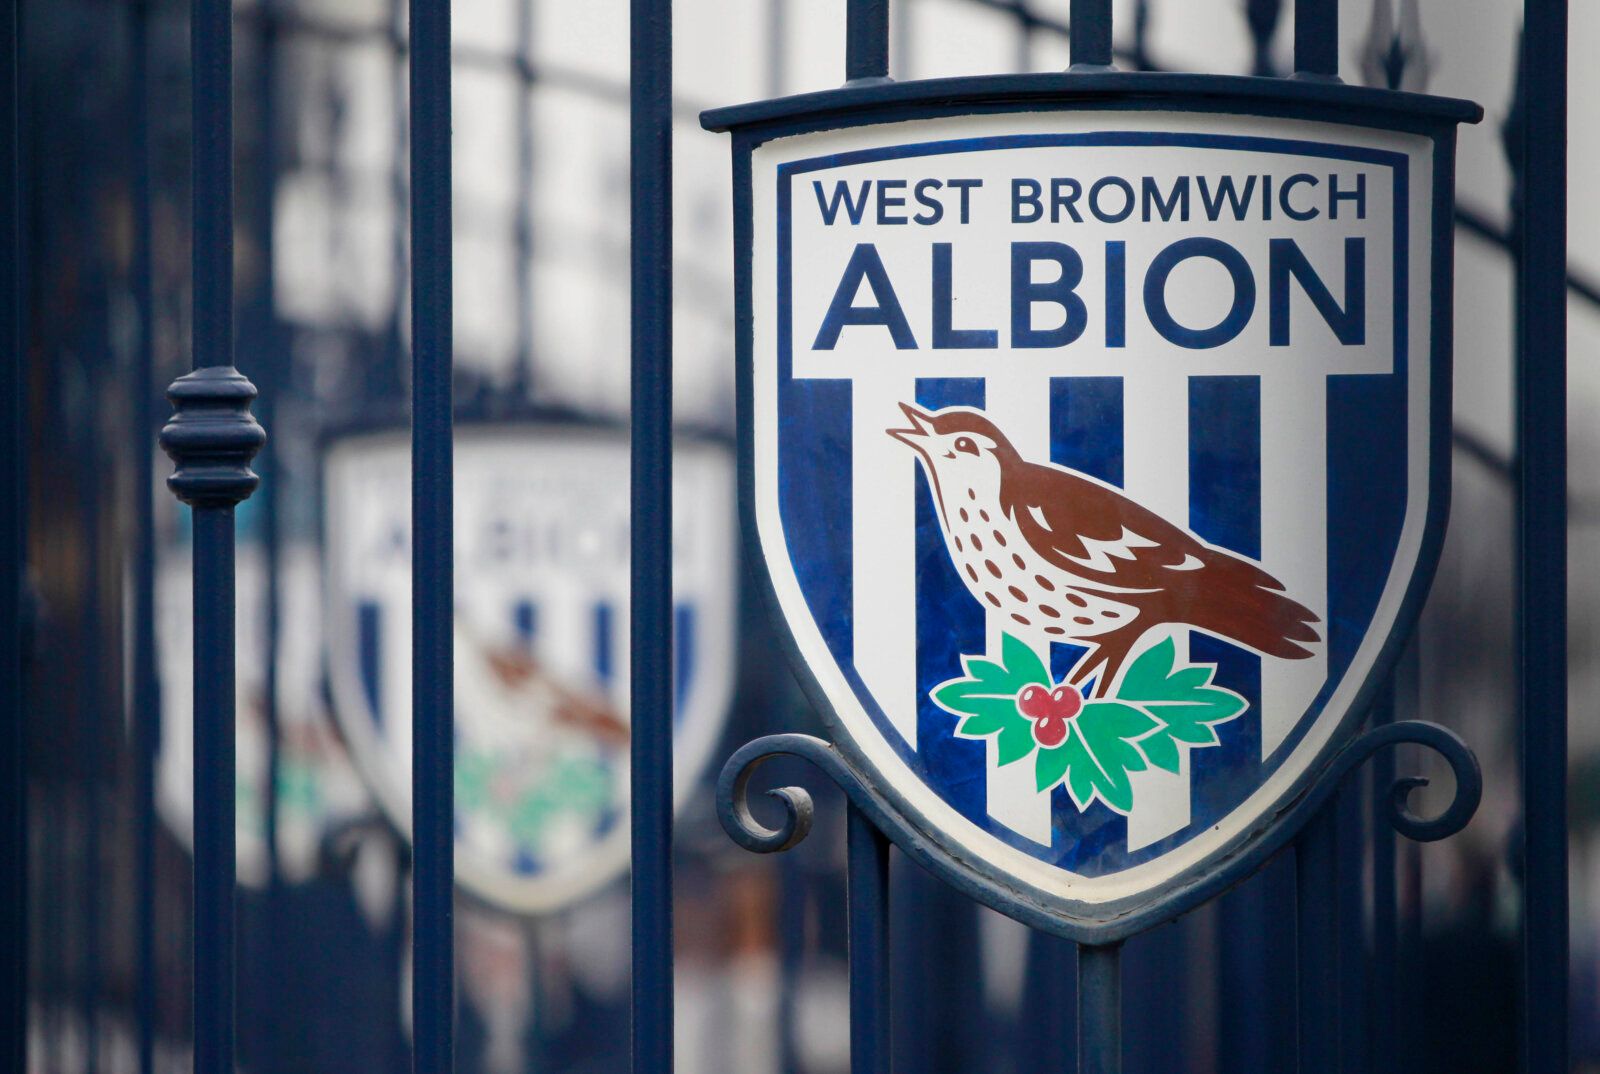 Football - West Bromwich Albion v Stoke City - Barclays Premier League - The Hawthorns - 14/3/15 
General view of The West Bromwich Albion logo before the game 
Mandatory Credit: Action Images / Ed Sykes 
Livepic 
EDITORIAL USE ONLY. No use with unauthorized audio, video, data, fixture lists, club/league logos or 